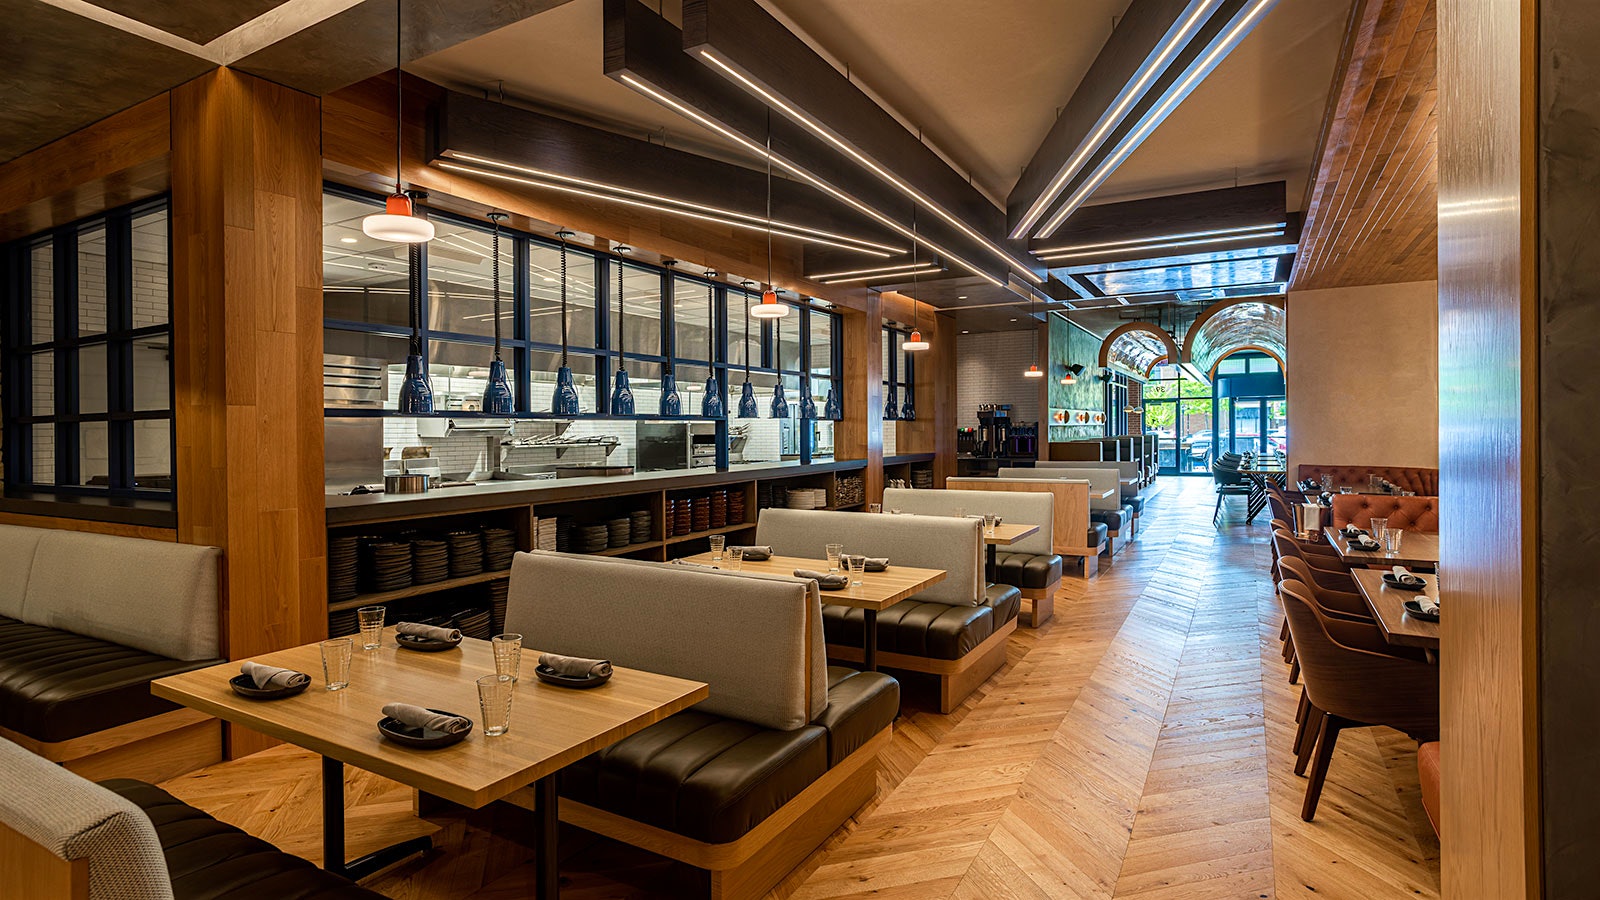  The dining room at Ramsay's Kitchen in Naperville, Ill., with wooden design elements and gray and brown leather benches